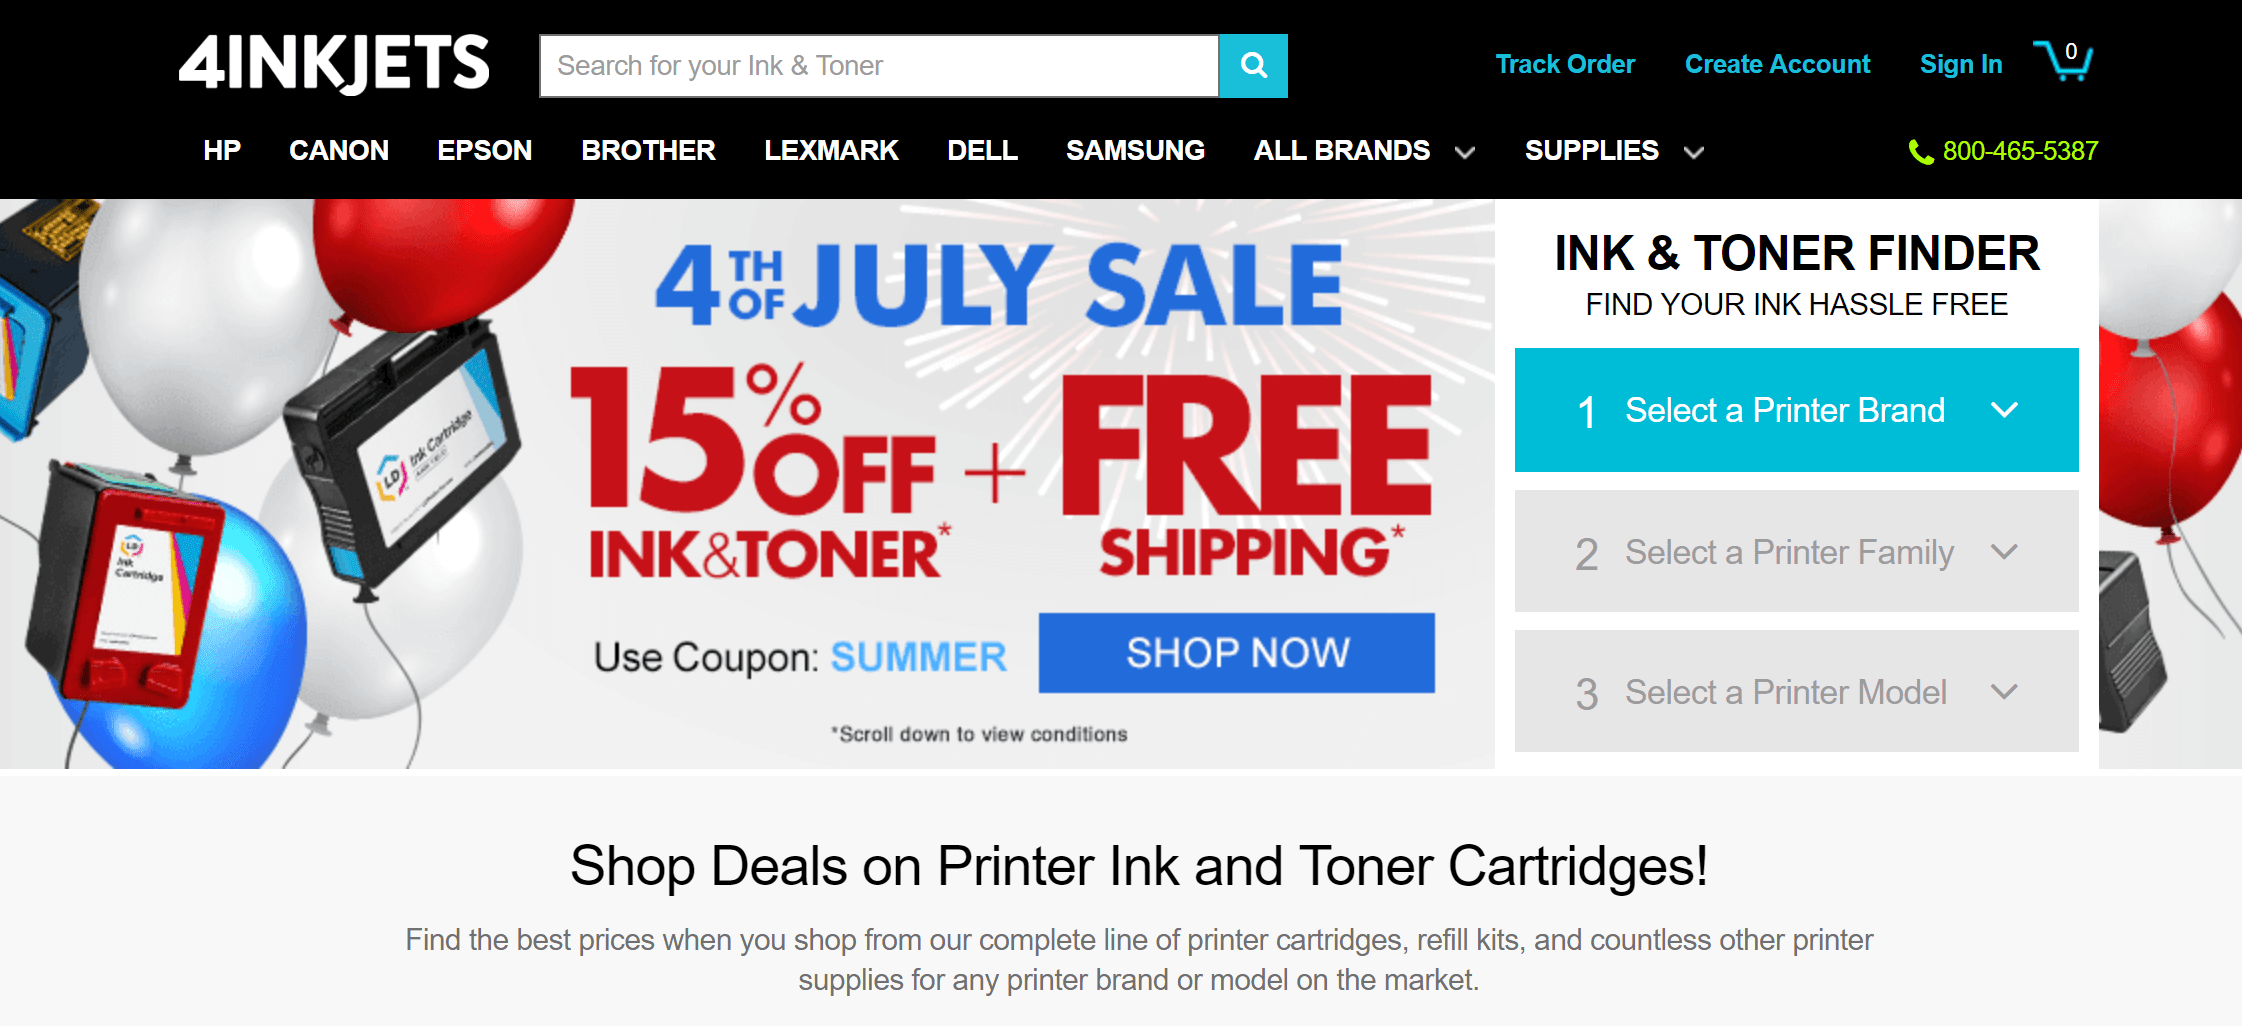 4inkjets discount coupon codes